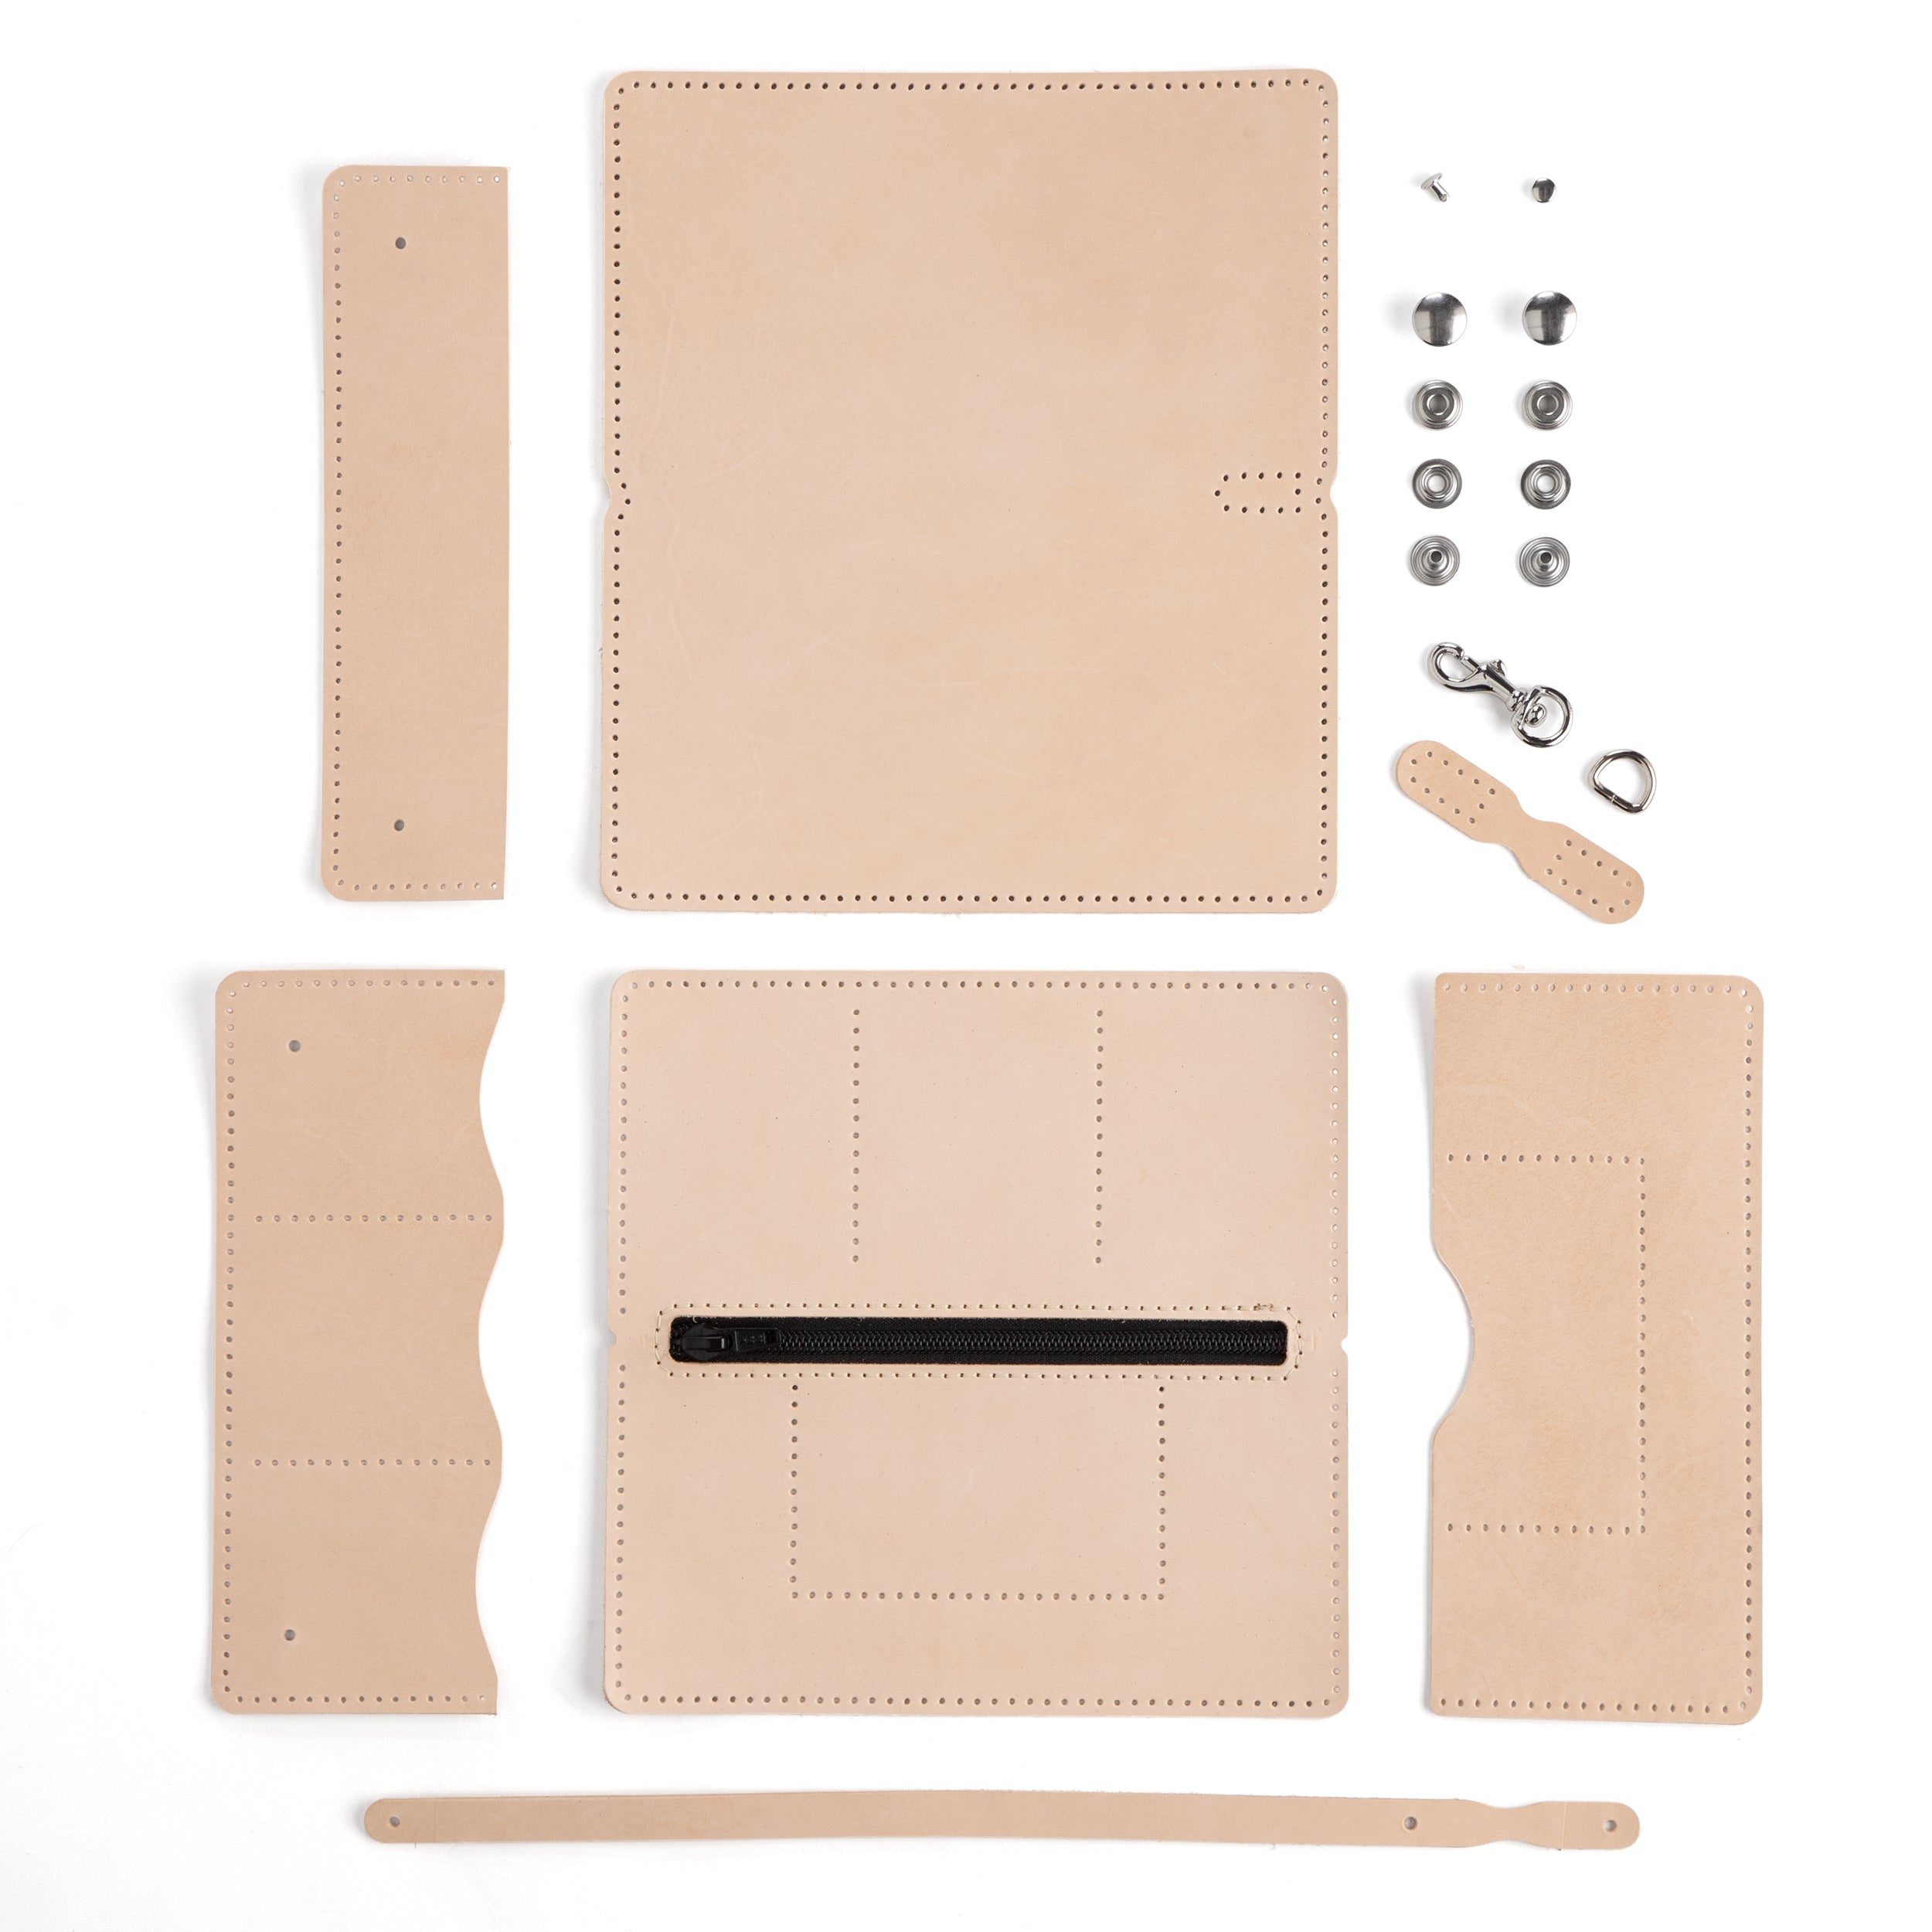 Gibson Large Wallet Kit Pack of 10